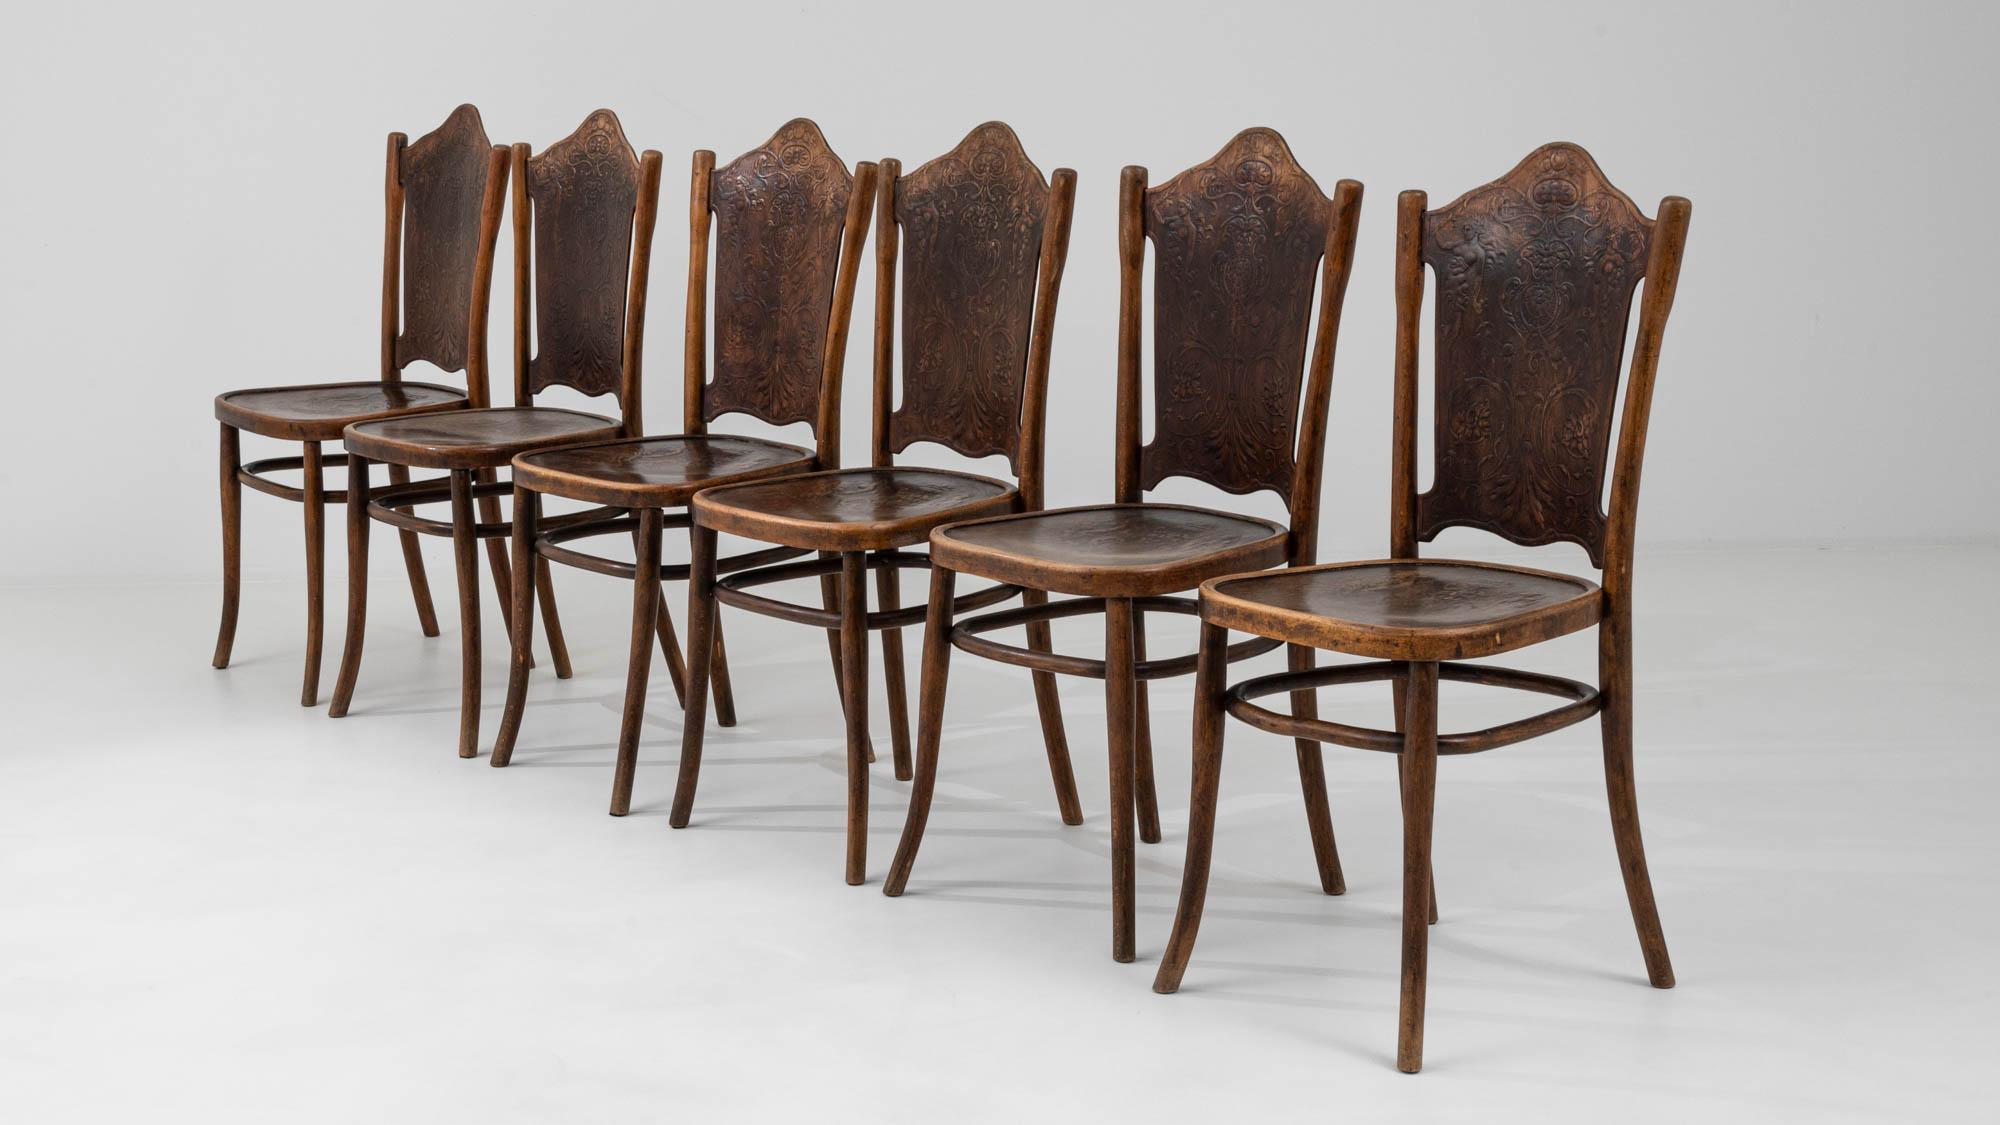 1910s Austrian Wooden Dining Chairs By Thonet, Set of 6 For Sale 7